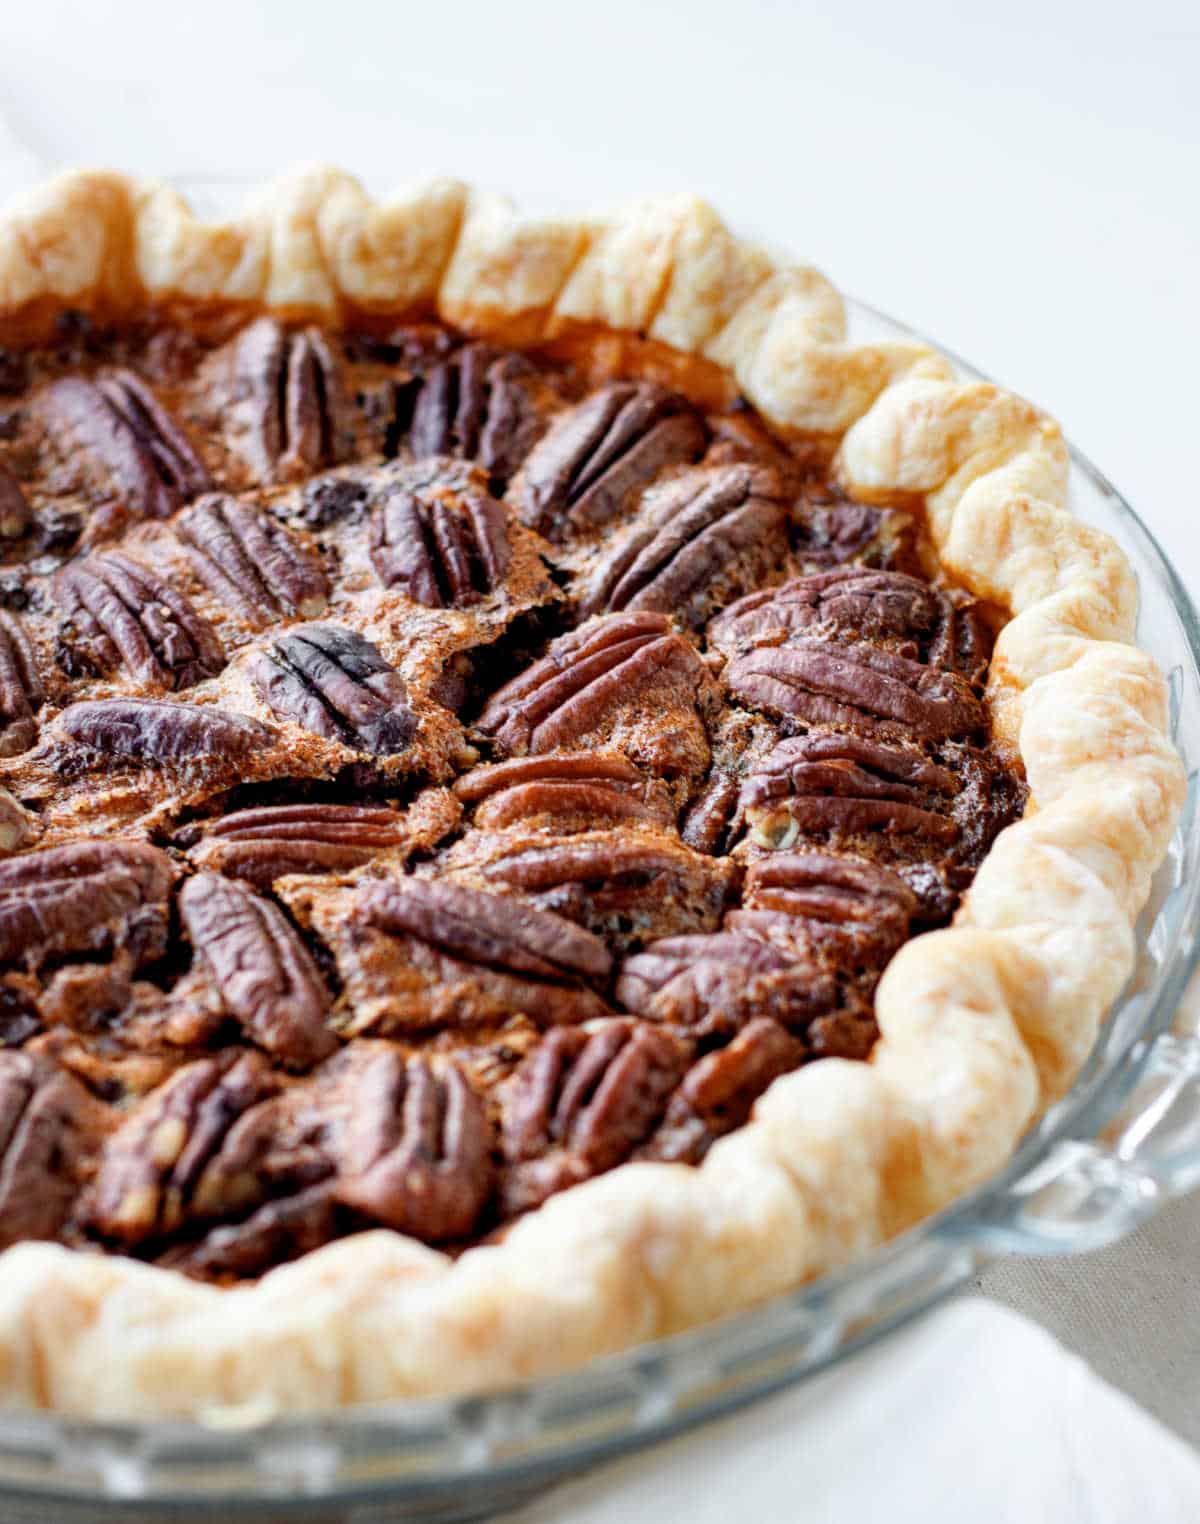 Baked pecan pie in a glass dish on a white surface. Partial view.